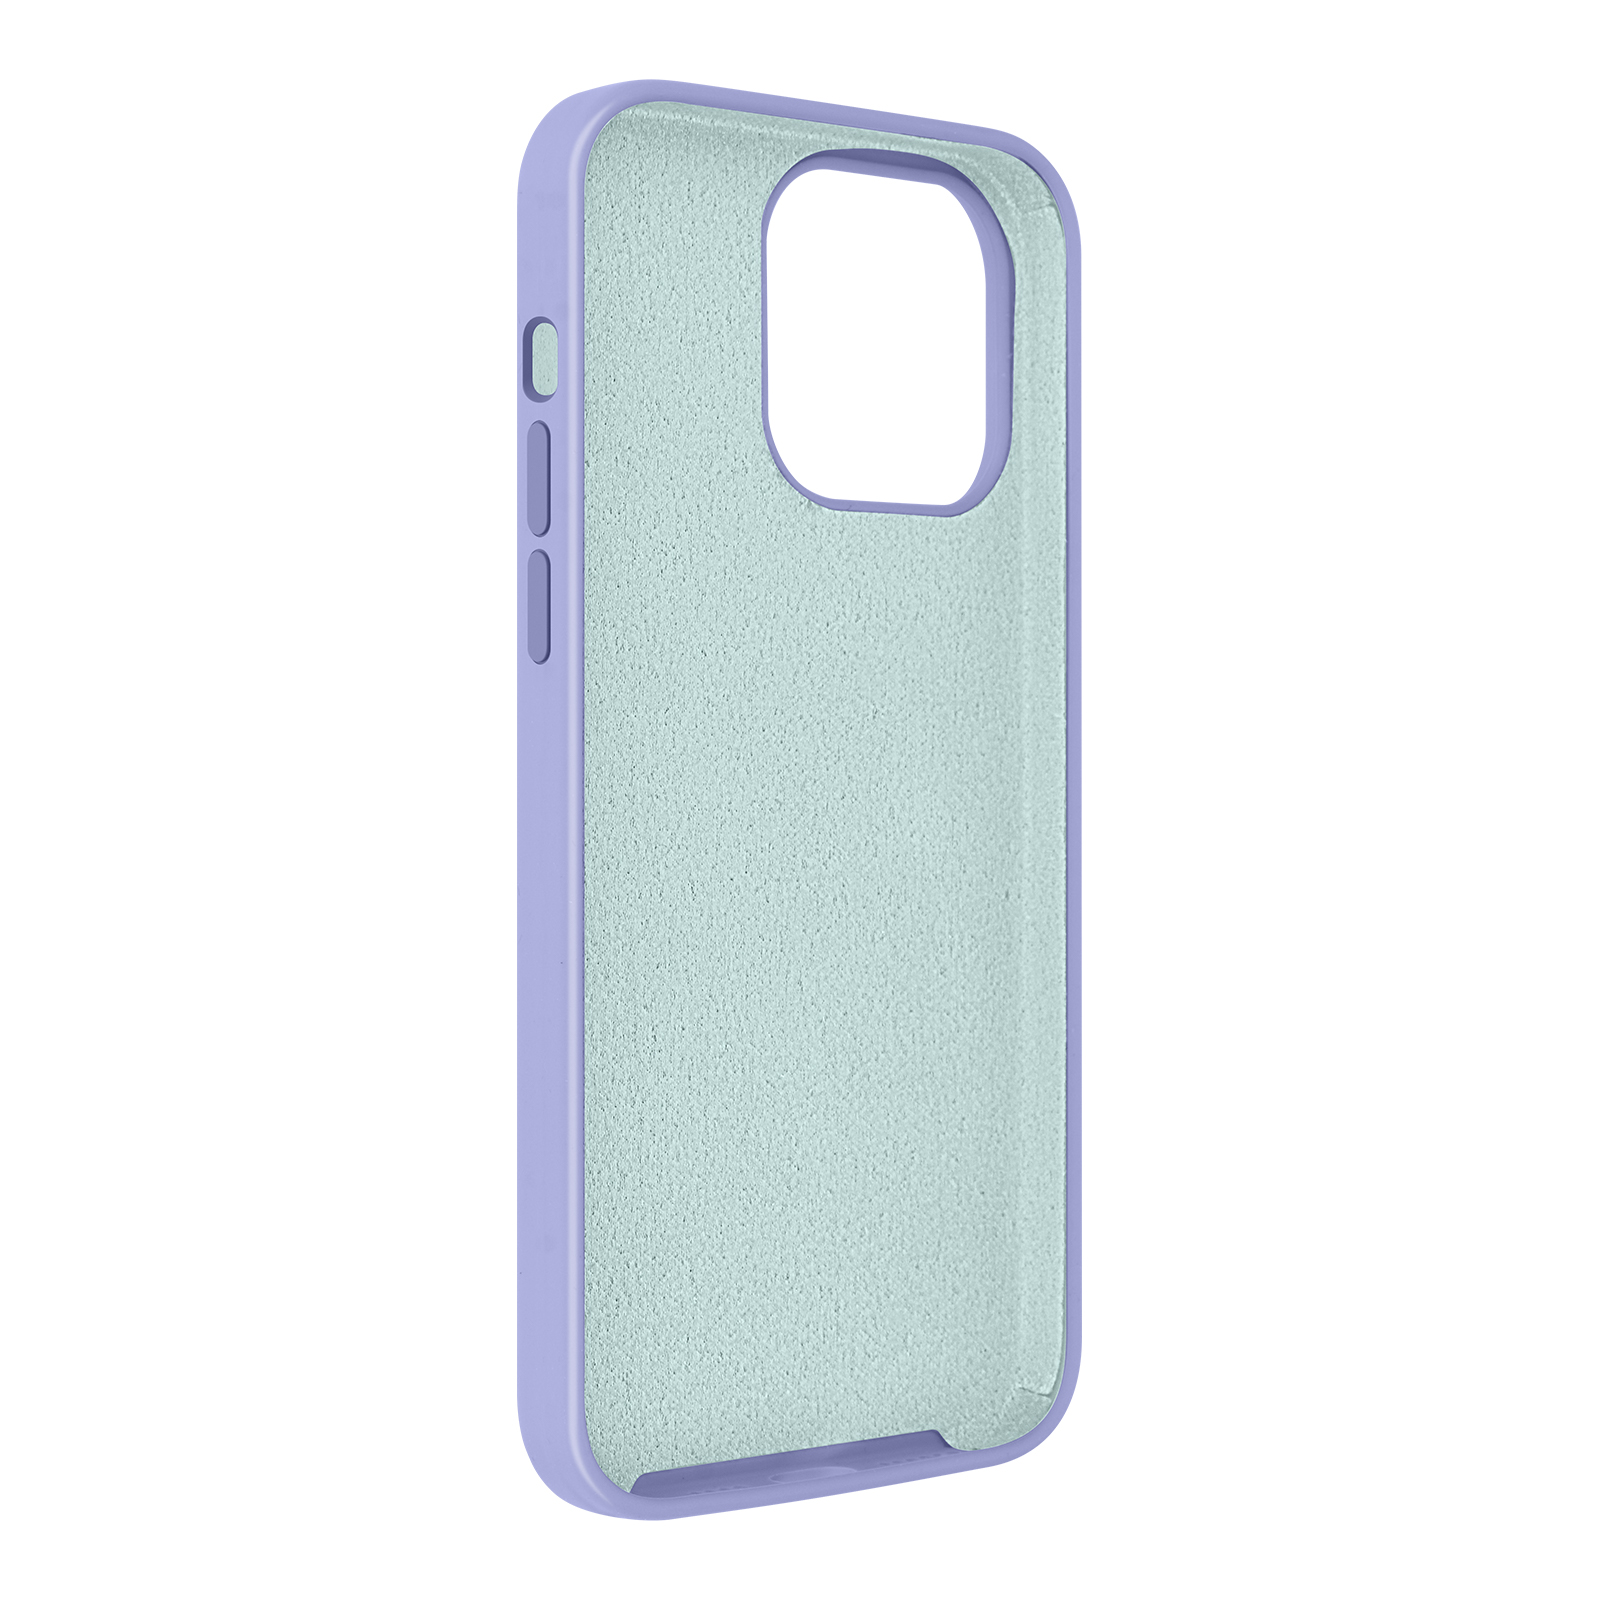 14, Series, Lila Backcover, iPhone Apple, MOXIE BeFluo